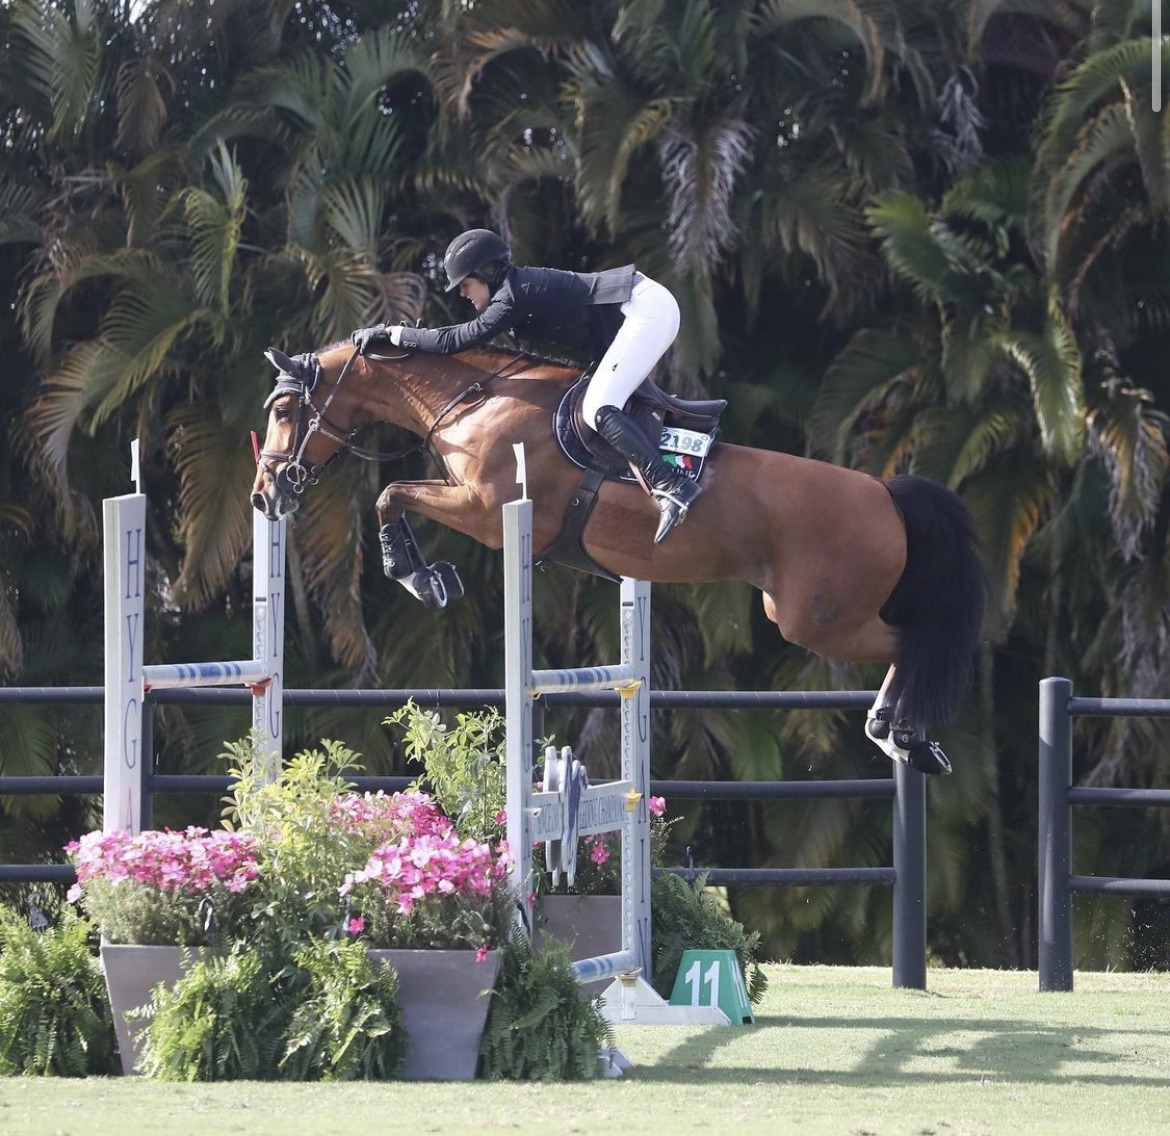 Bahira-S with a 3rd place finish in the 1.40m class and a 7th place in the National GP!